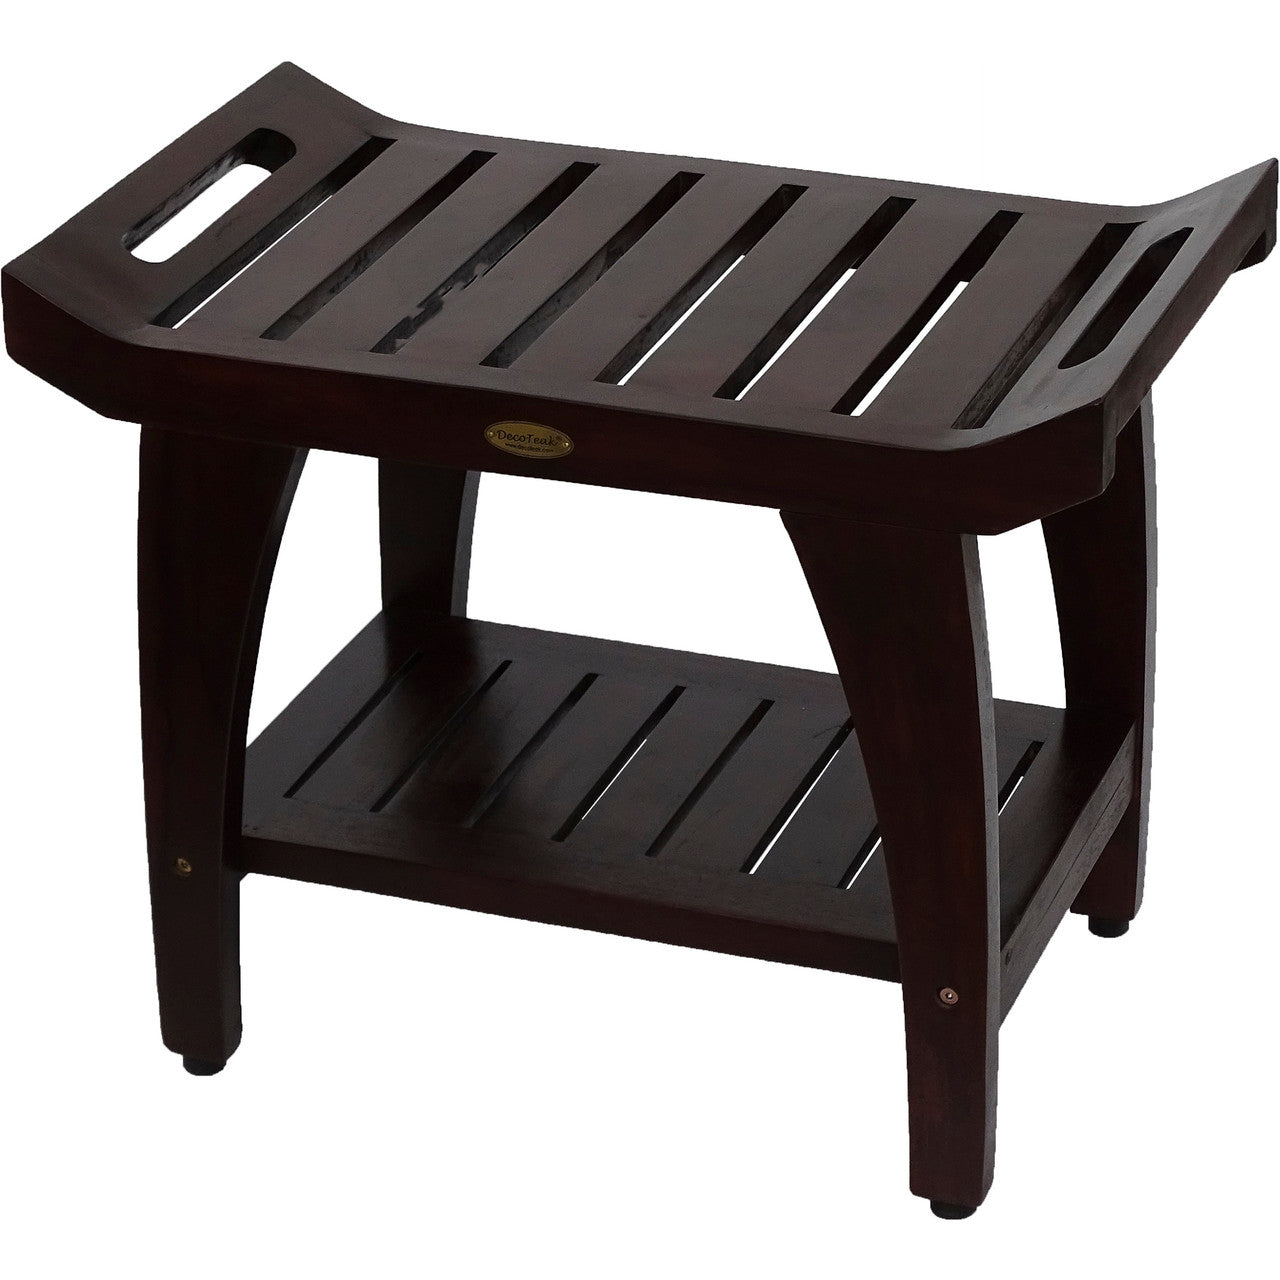 DecoTeak® Tranquility® 24" Teak Wood Shower Bench with Shelf and LiftAide® Arms in Woodland Brown Finish